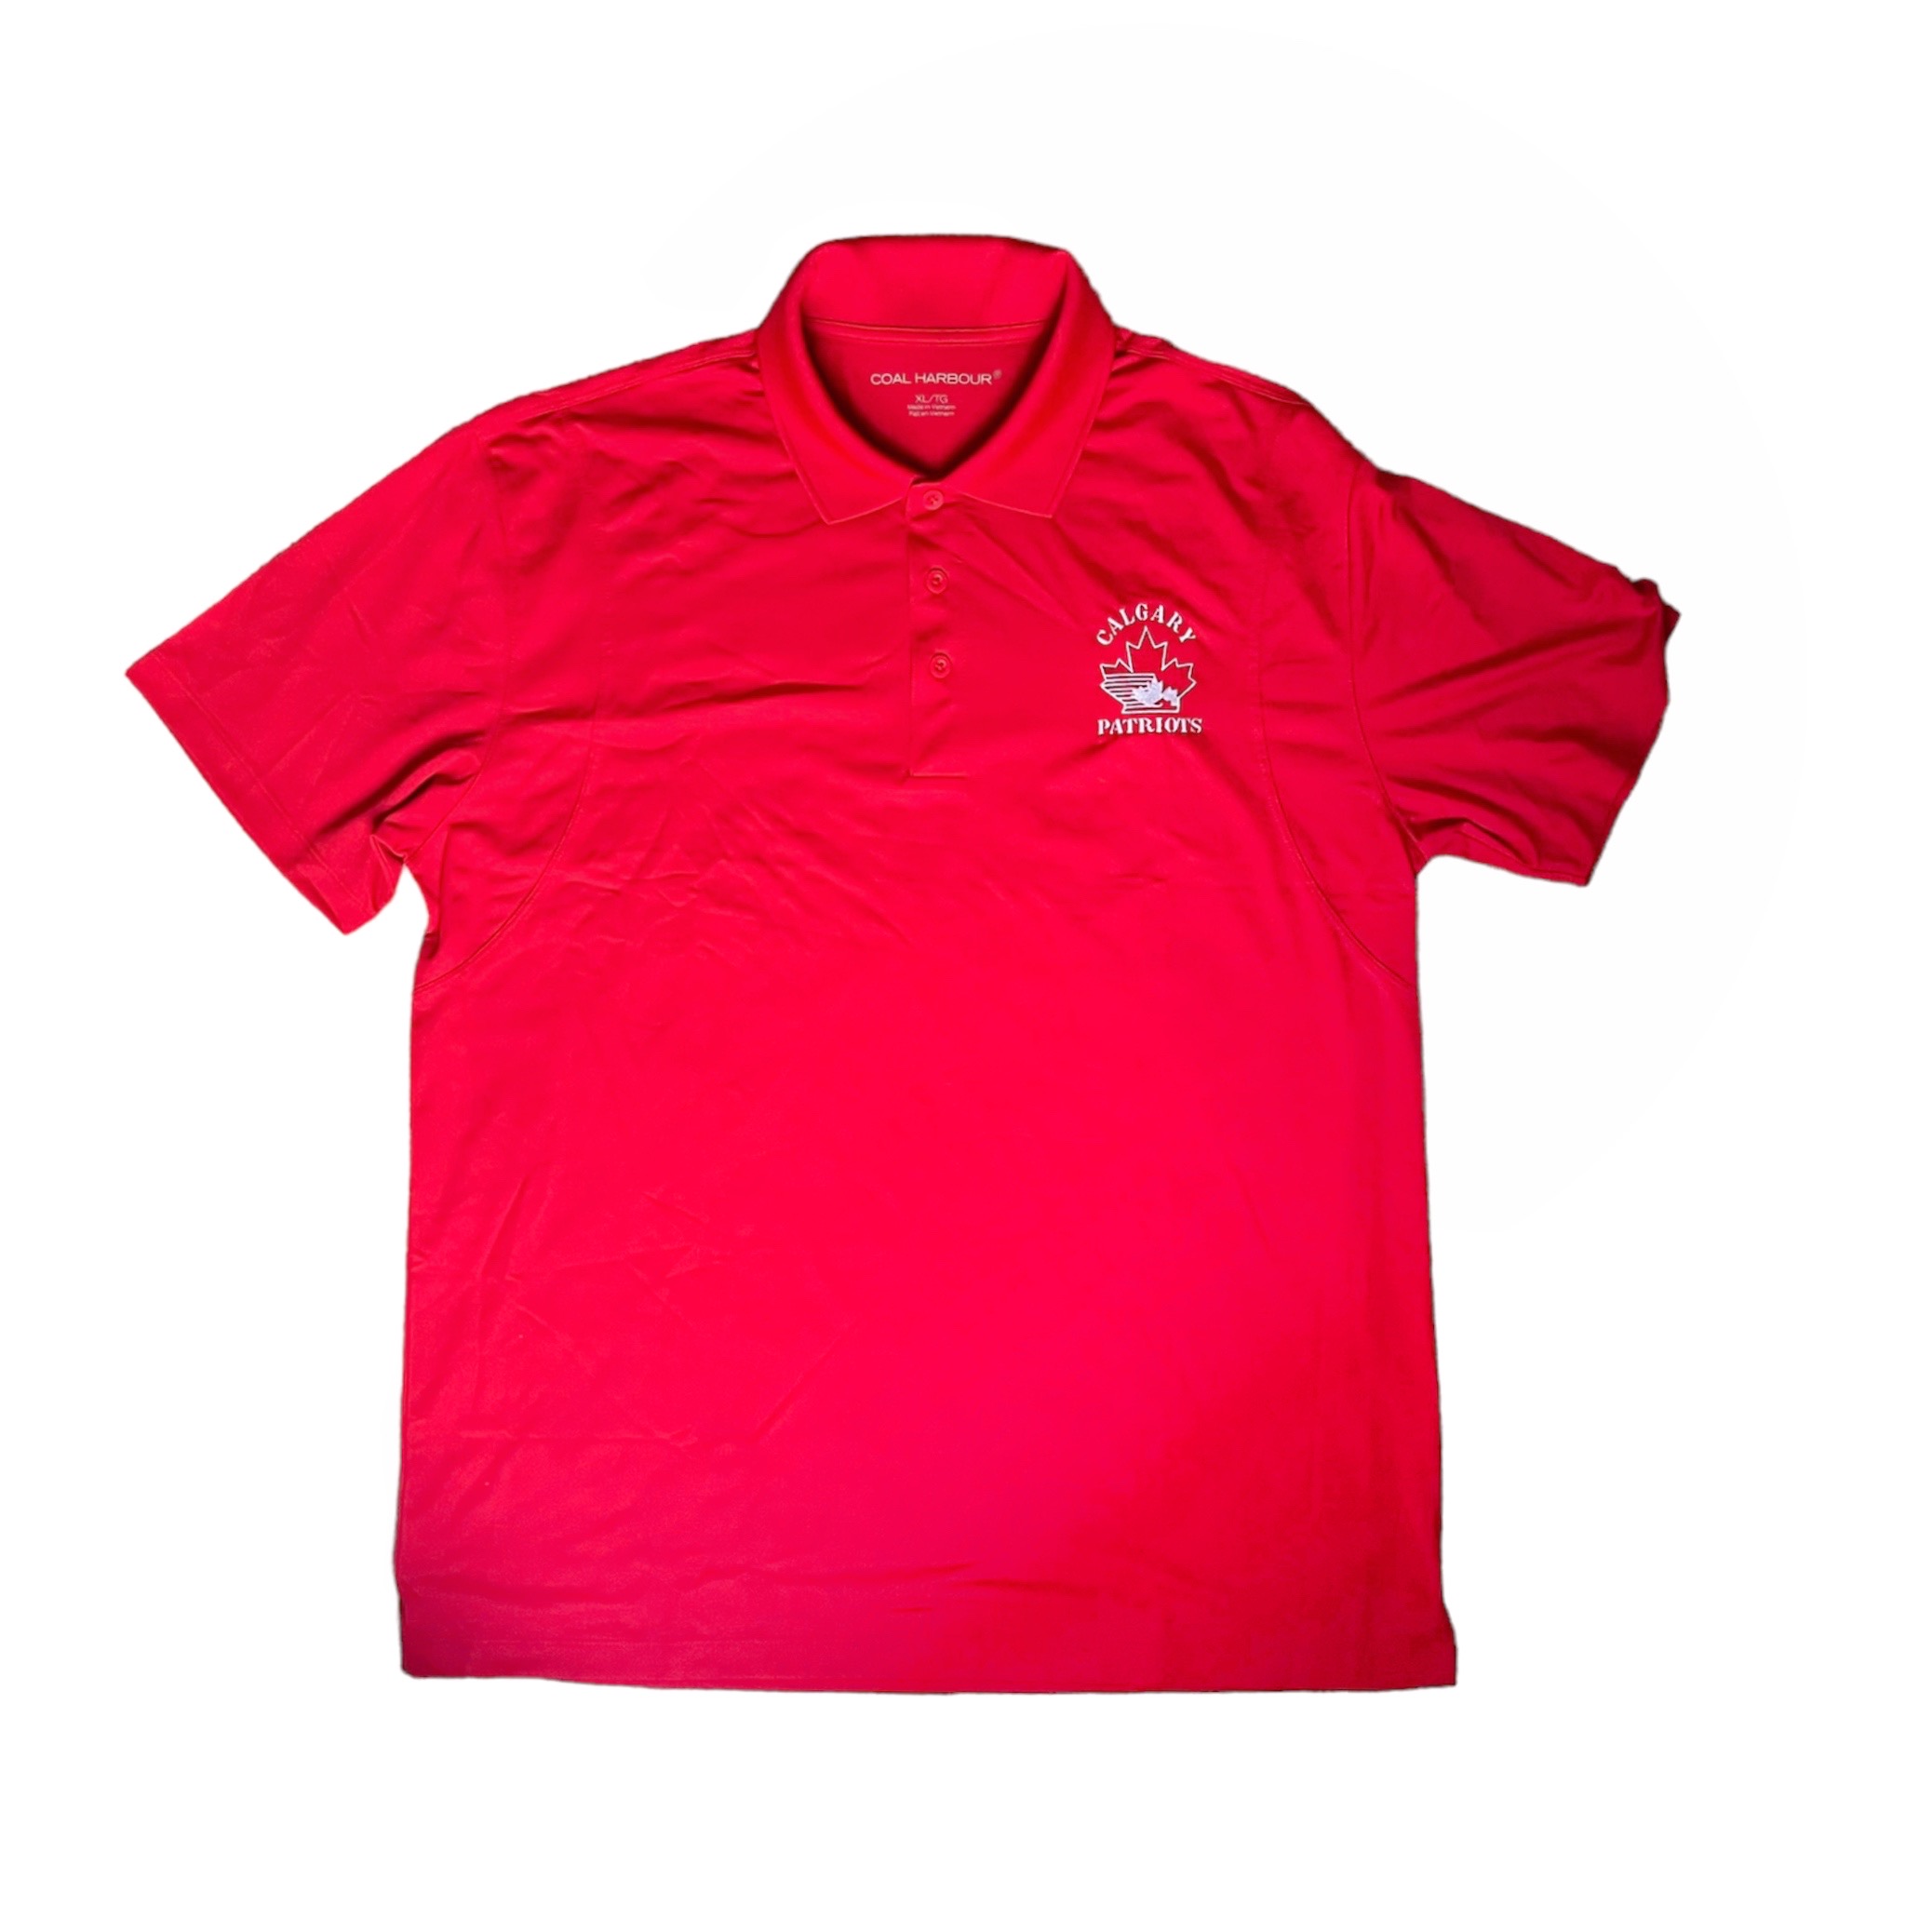 Men's Officials Polo Shirt - Red or White